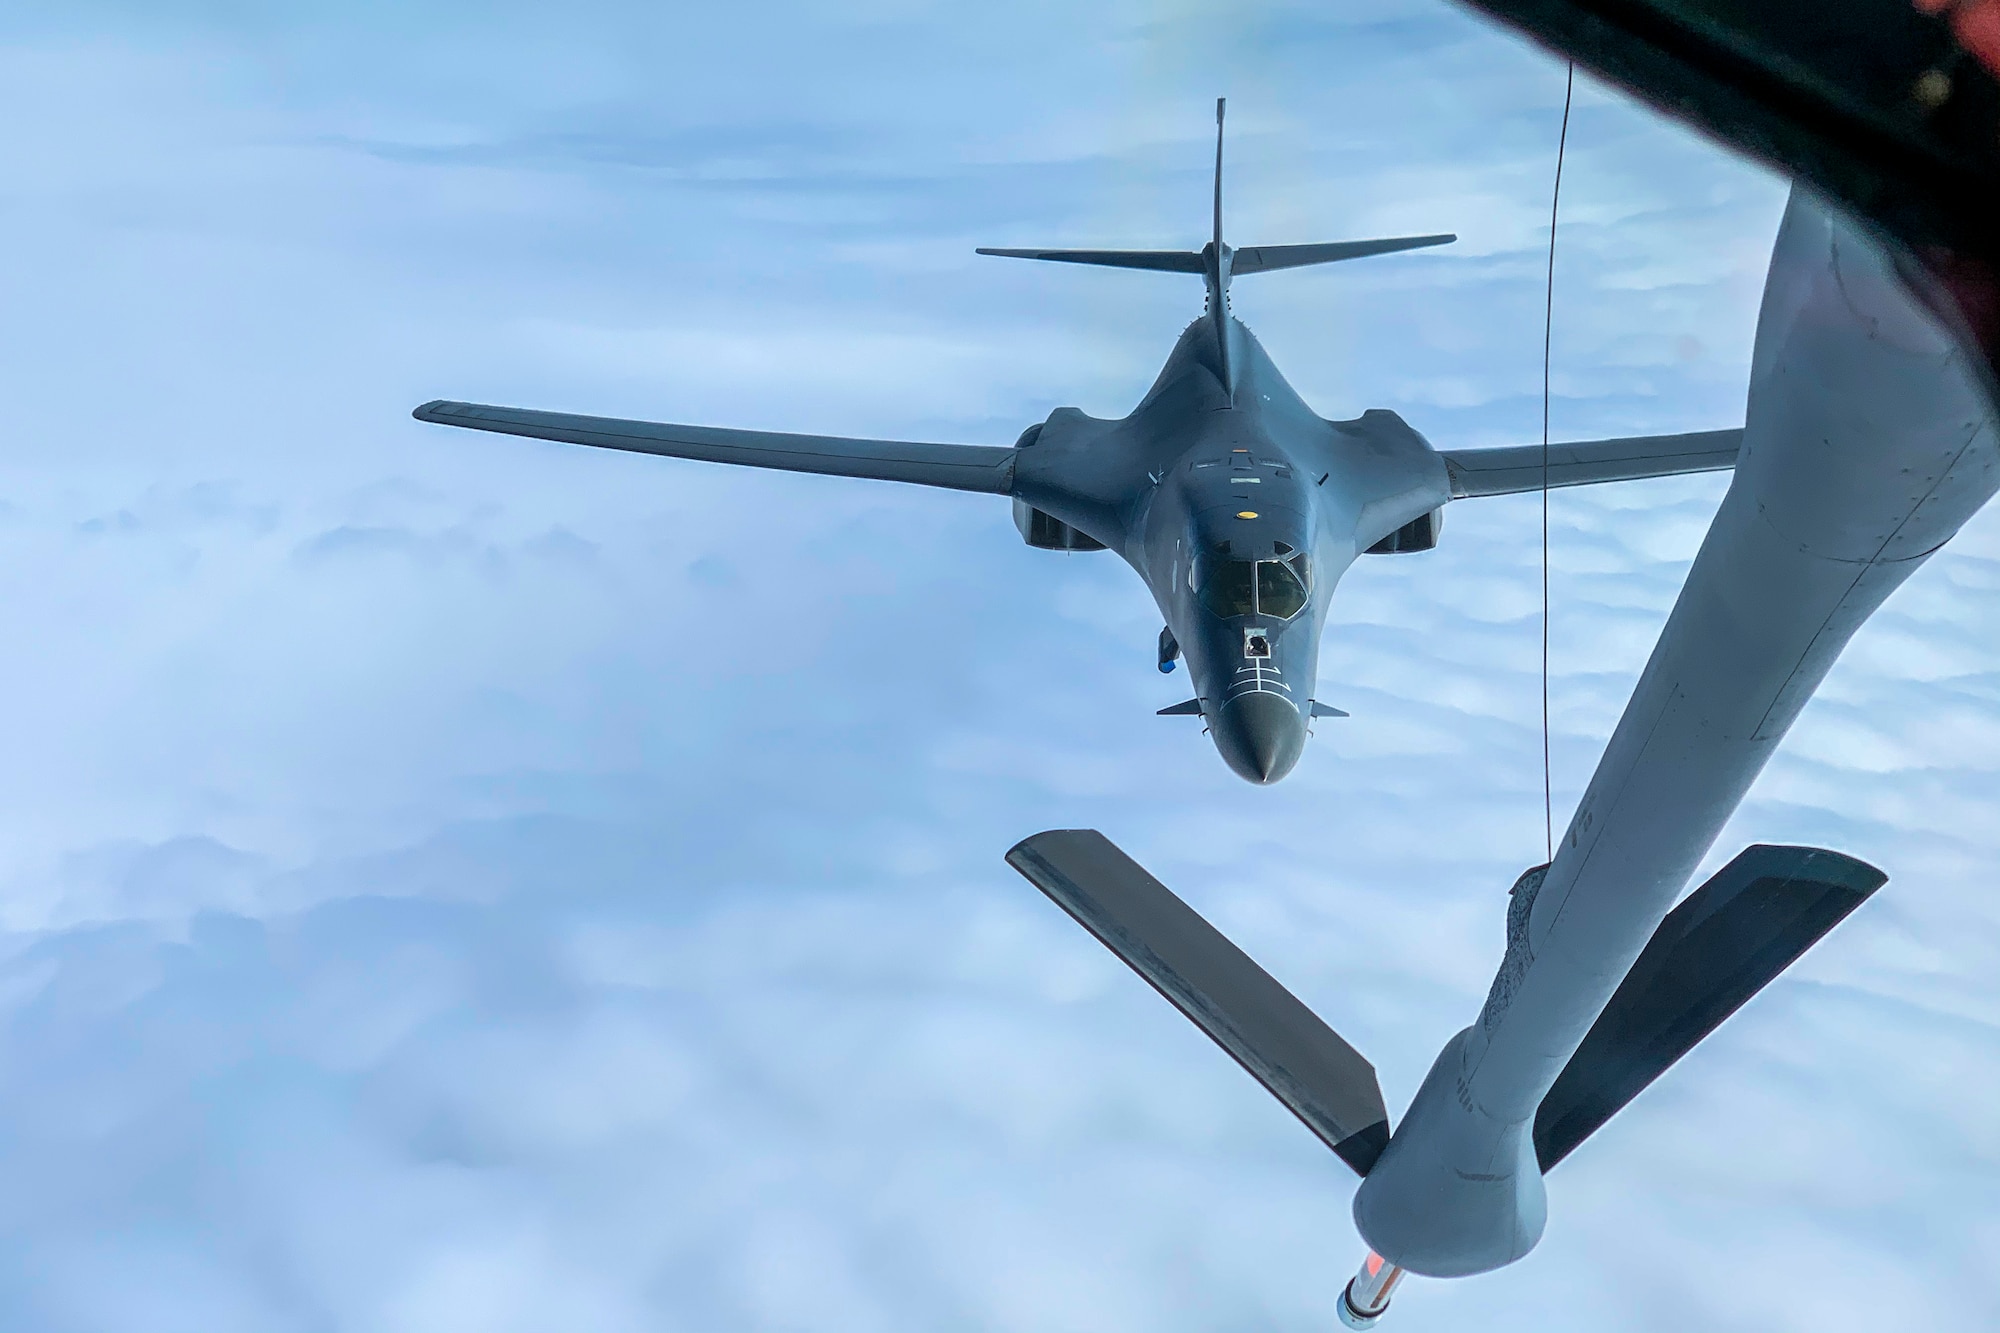 A U.S. Air Force B-1B Lancer assigned to the 9th Expeditionary Bomb Squadron closes in on a KC-135 Stratotanker assigned to the 93rd Air Refueling Squadron in Alaska, May 21, 2020. During the Bomber Task Force mission, B-1s from Dyess Air Force Base received fuel from KC-135s assigned to Fairchild Air Force Base.  (U.S. Air Force photo by Airman 1st Class Aaron Larue Guerrisky)